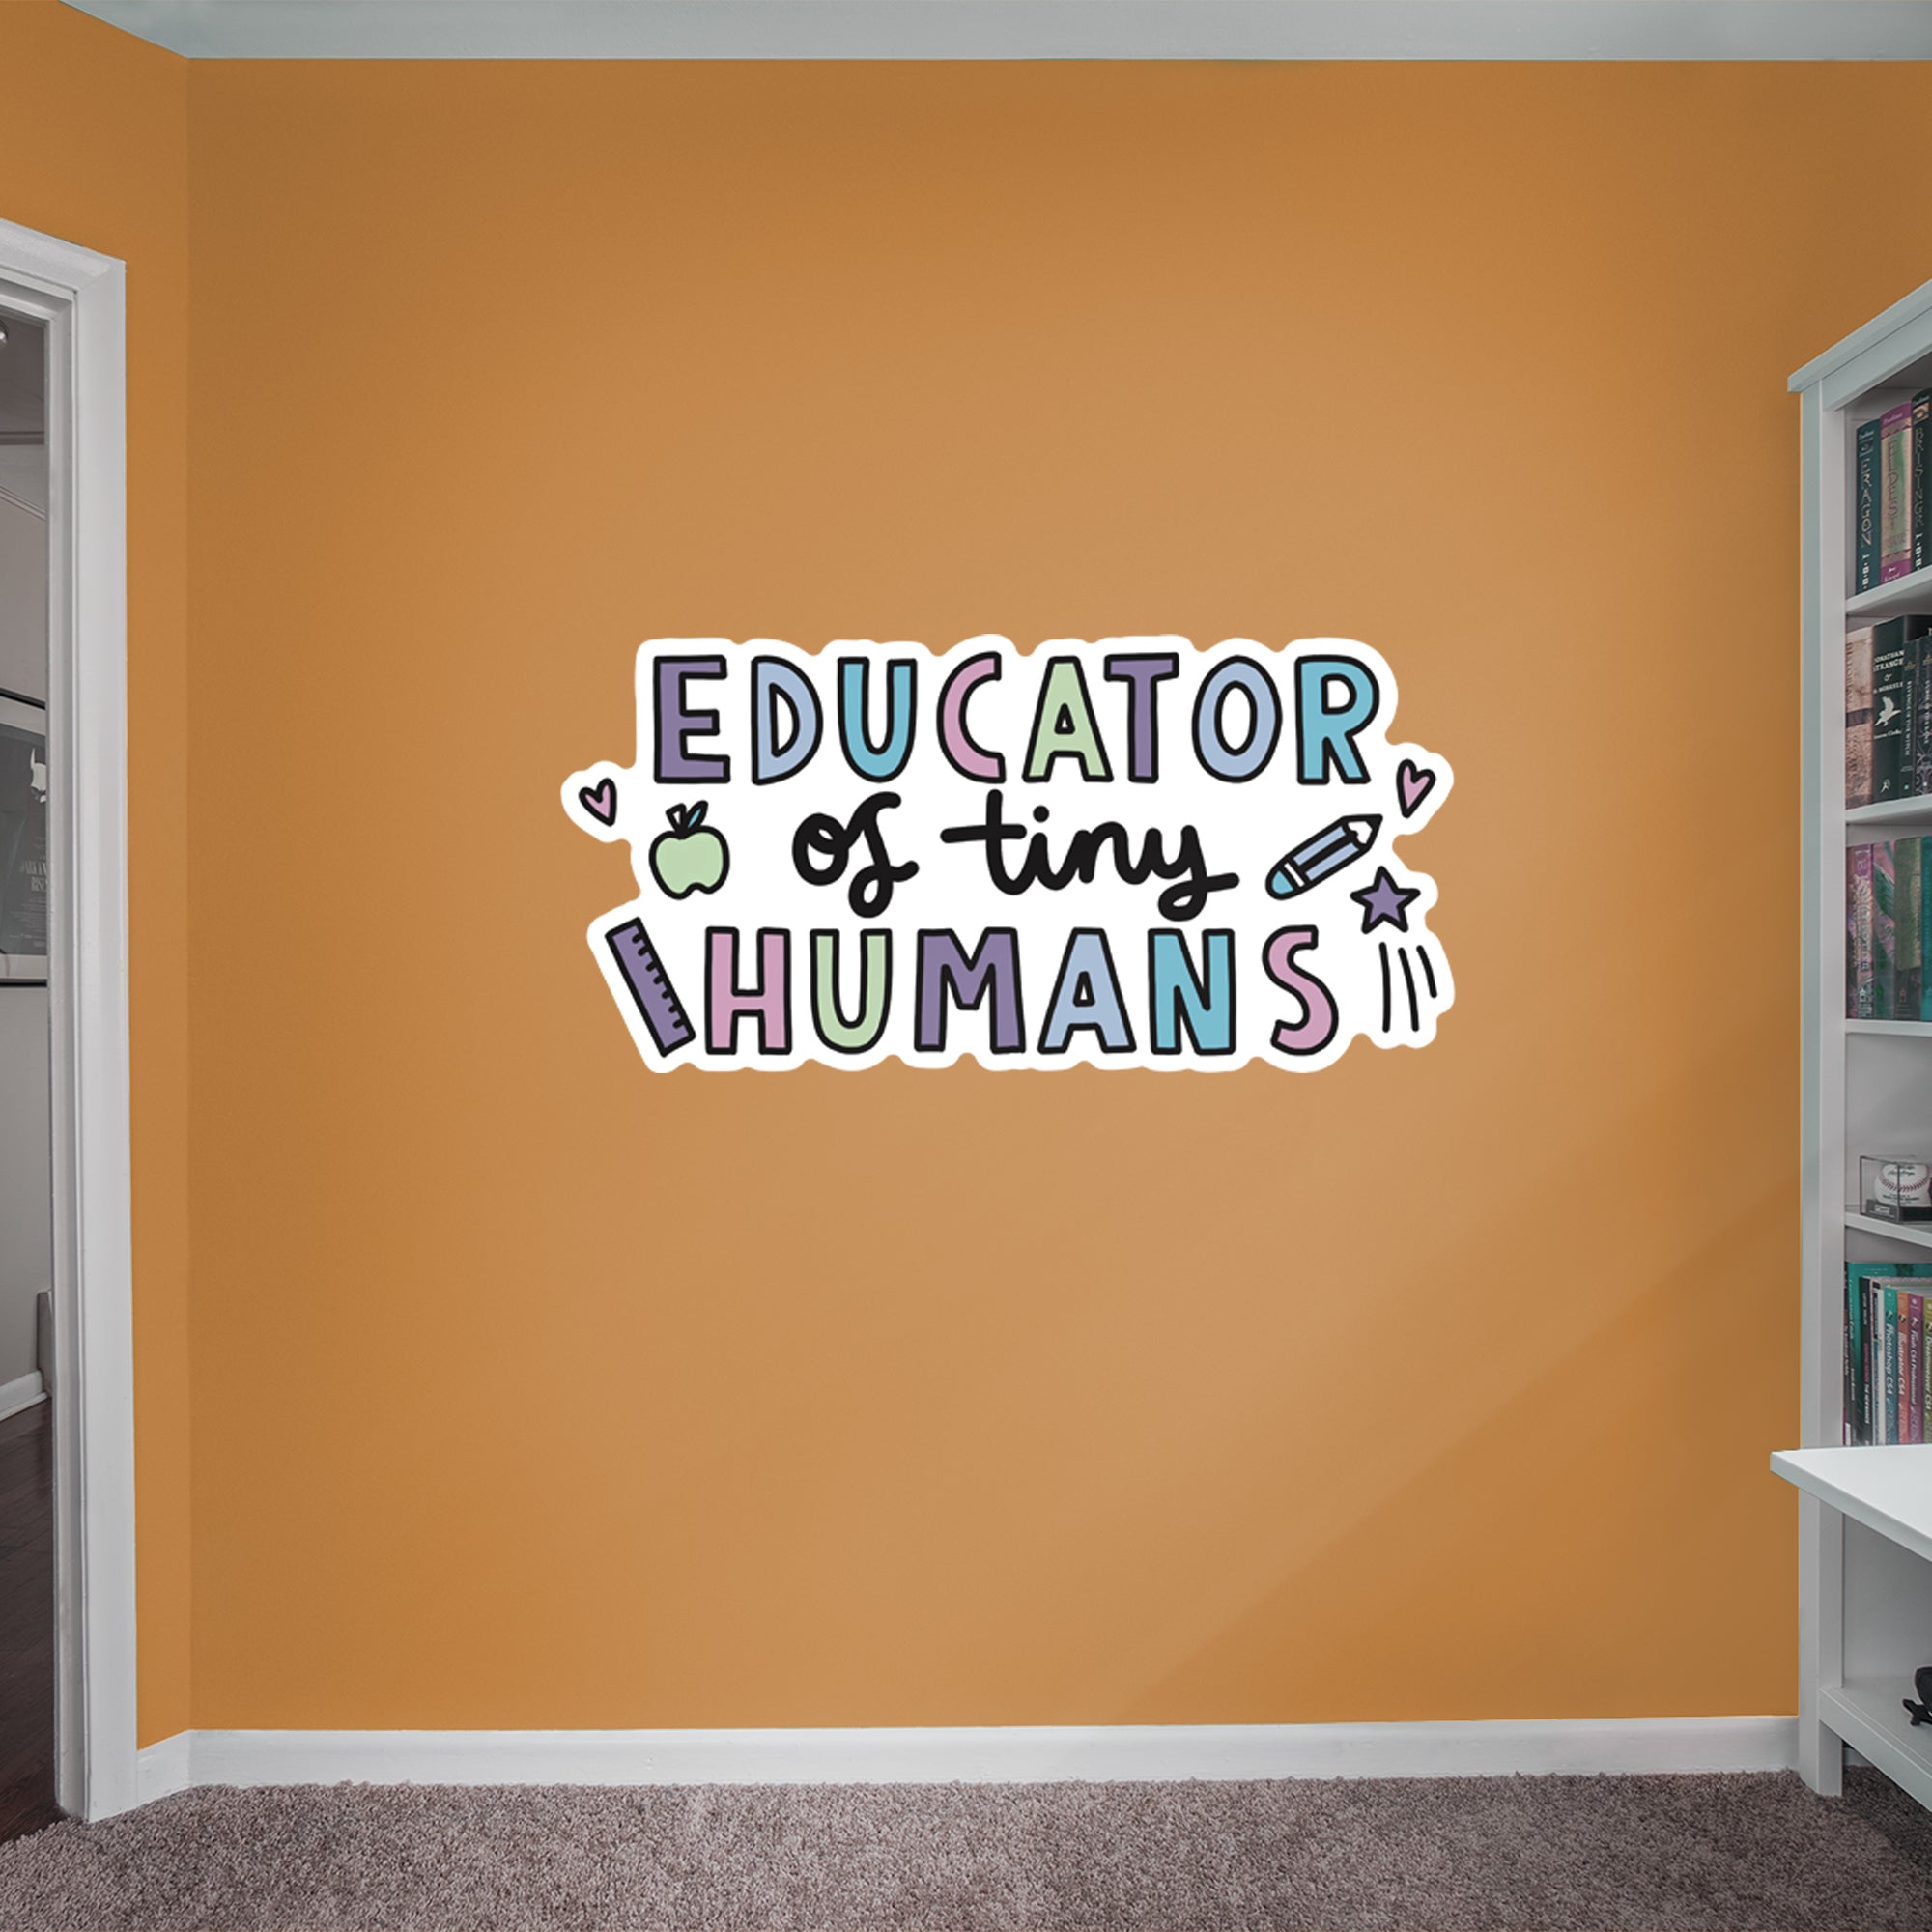 Educator Of Tiny Humans - Officially Licensed Big Moods Removable Wall Decal Giant Decal (25"W x 50"H) by Fathead | Vinyl